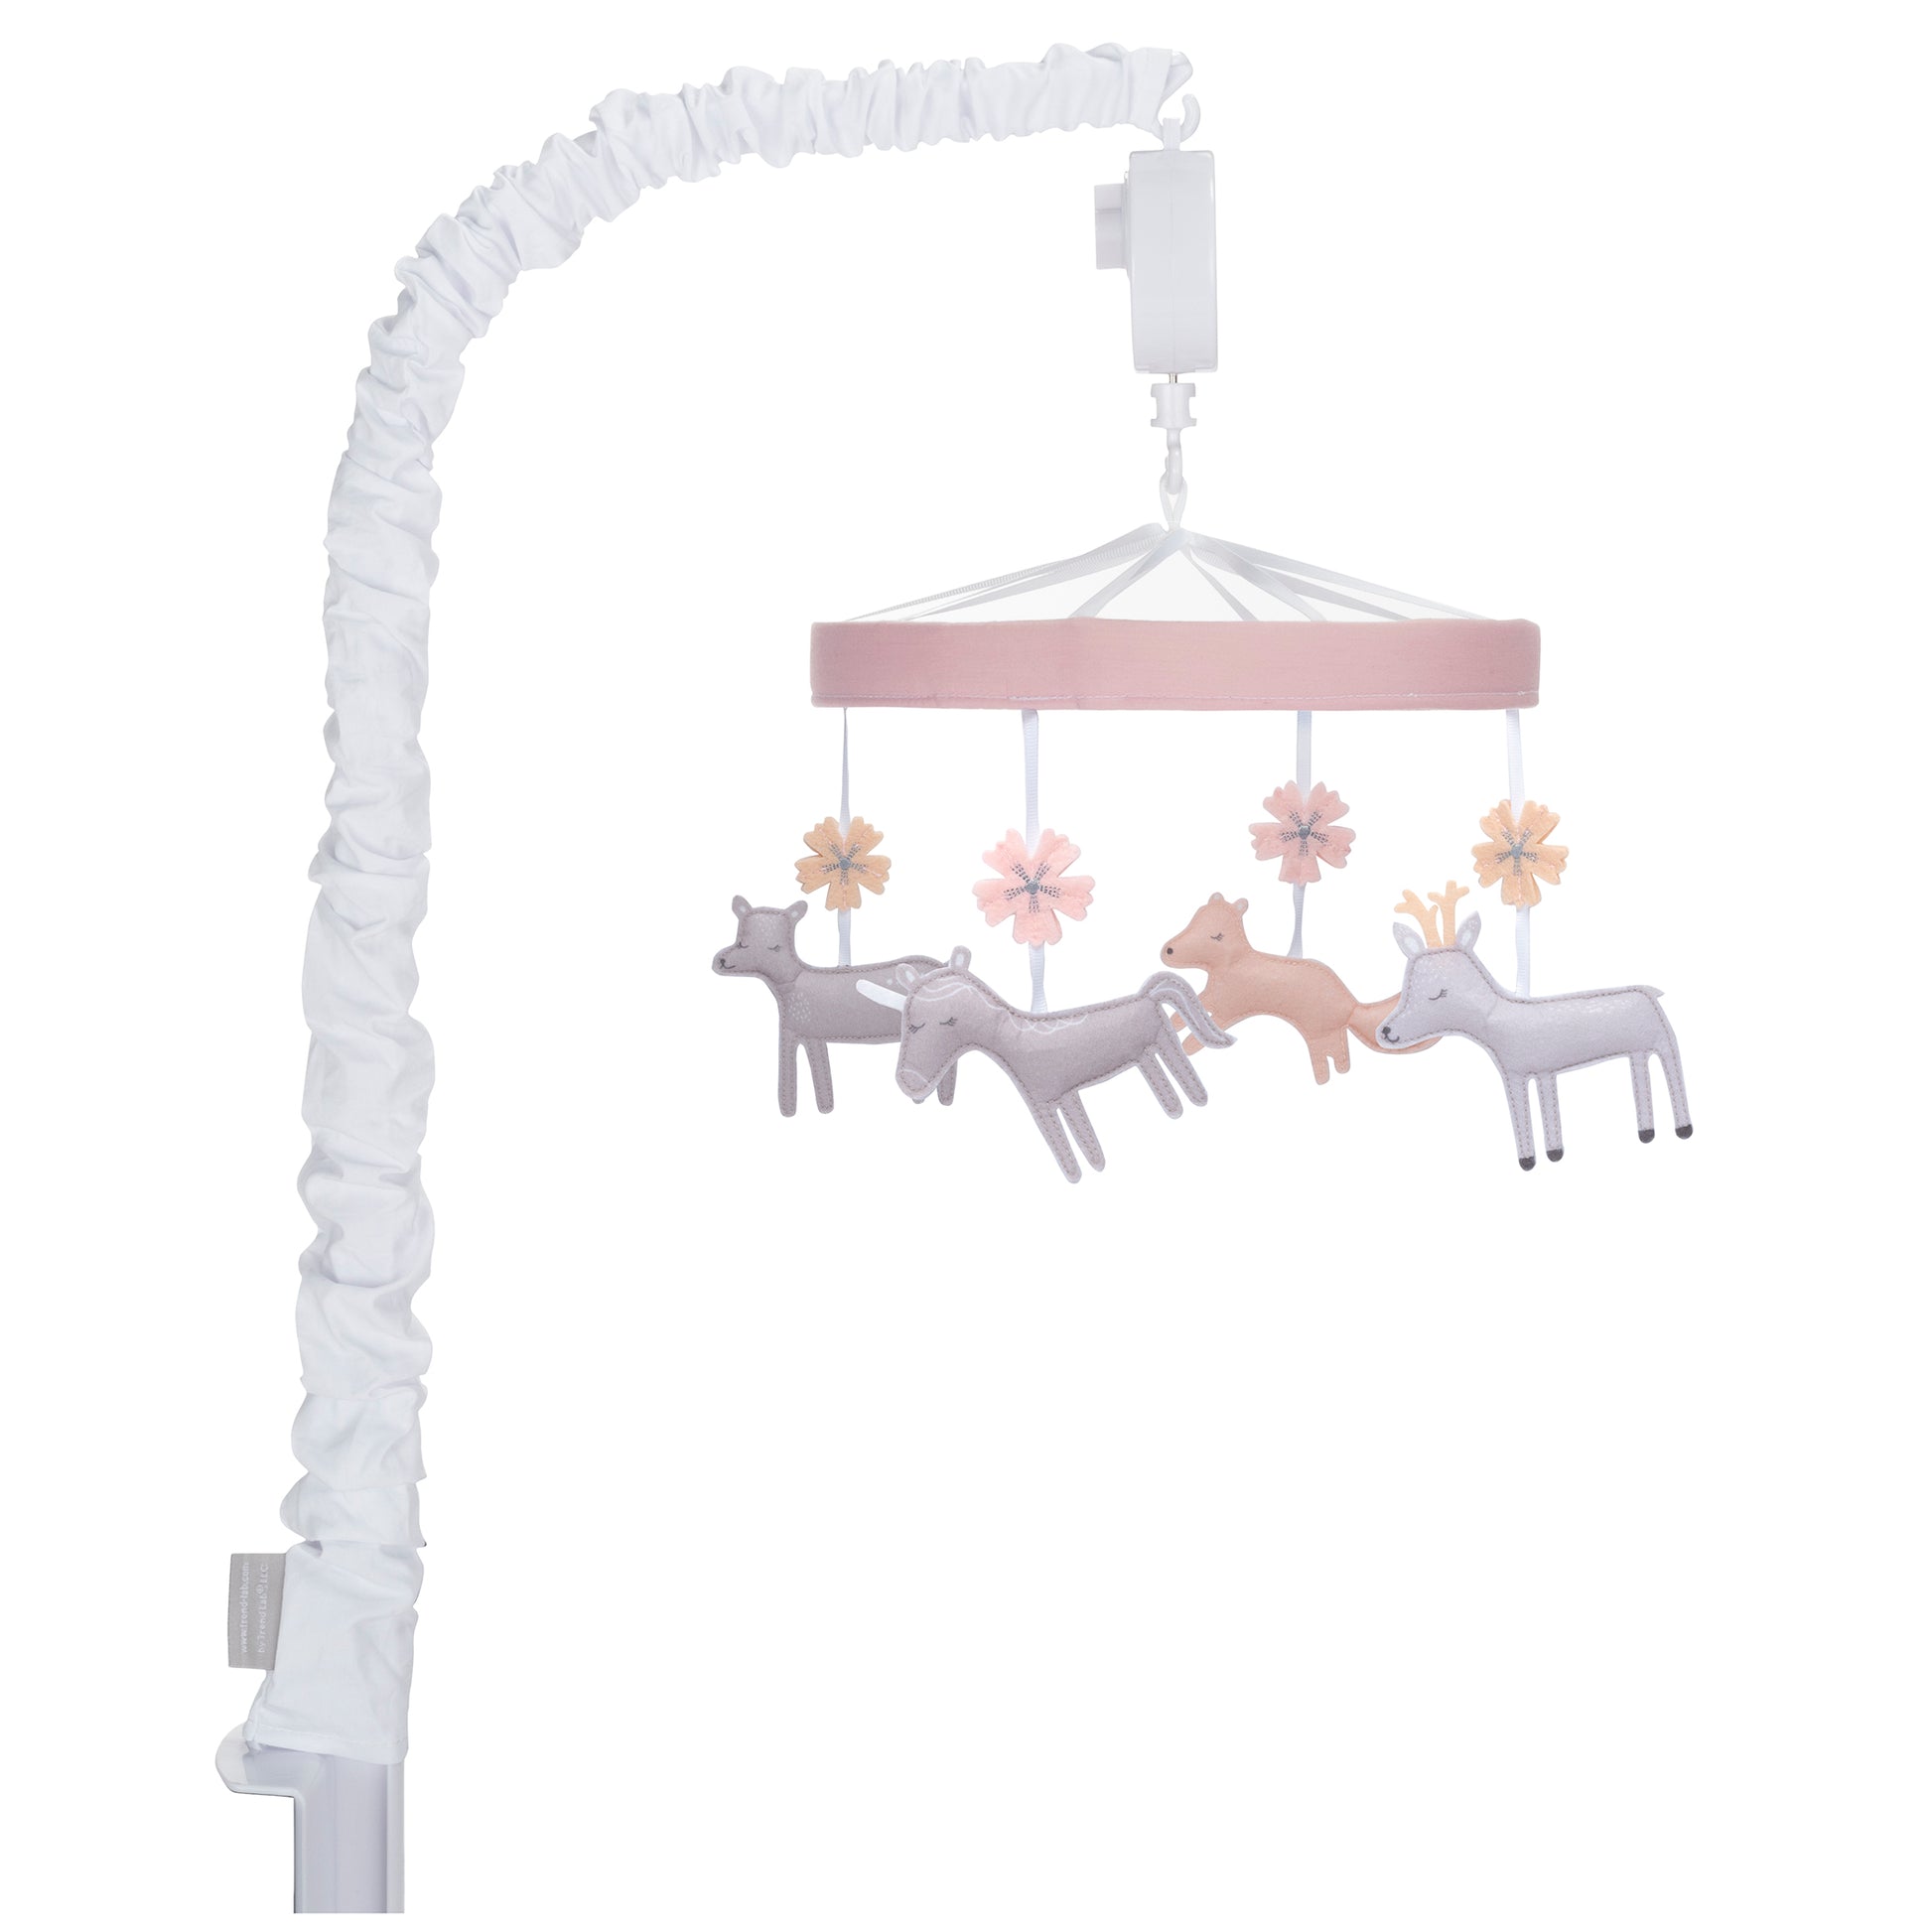  Forest Garden Musical Crib Baby Mobile- Four felt whimsical forest critters with a flower in colors of pinks and gray are suspended from decorative white ribbons to slowly rotate to Brahms’ Lullaby.